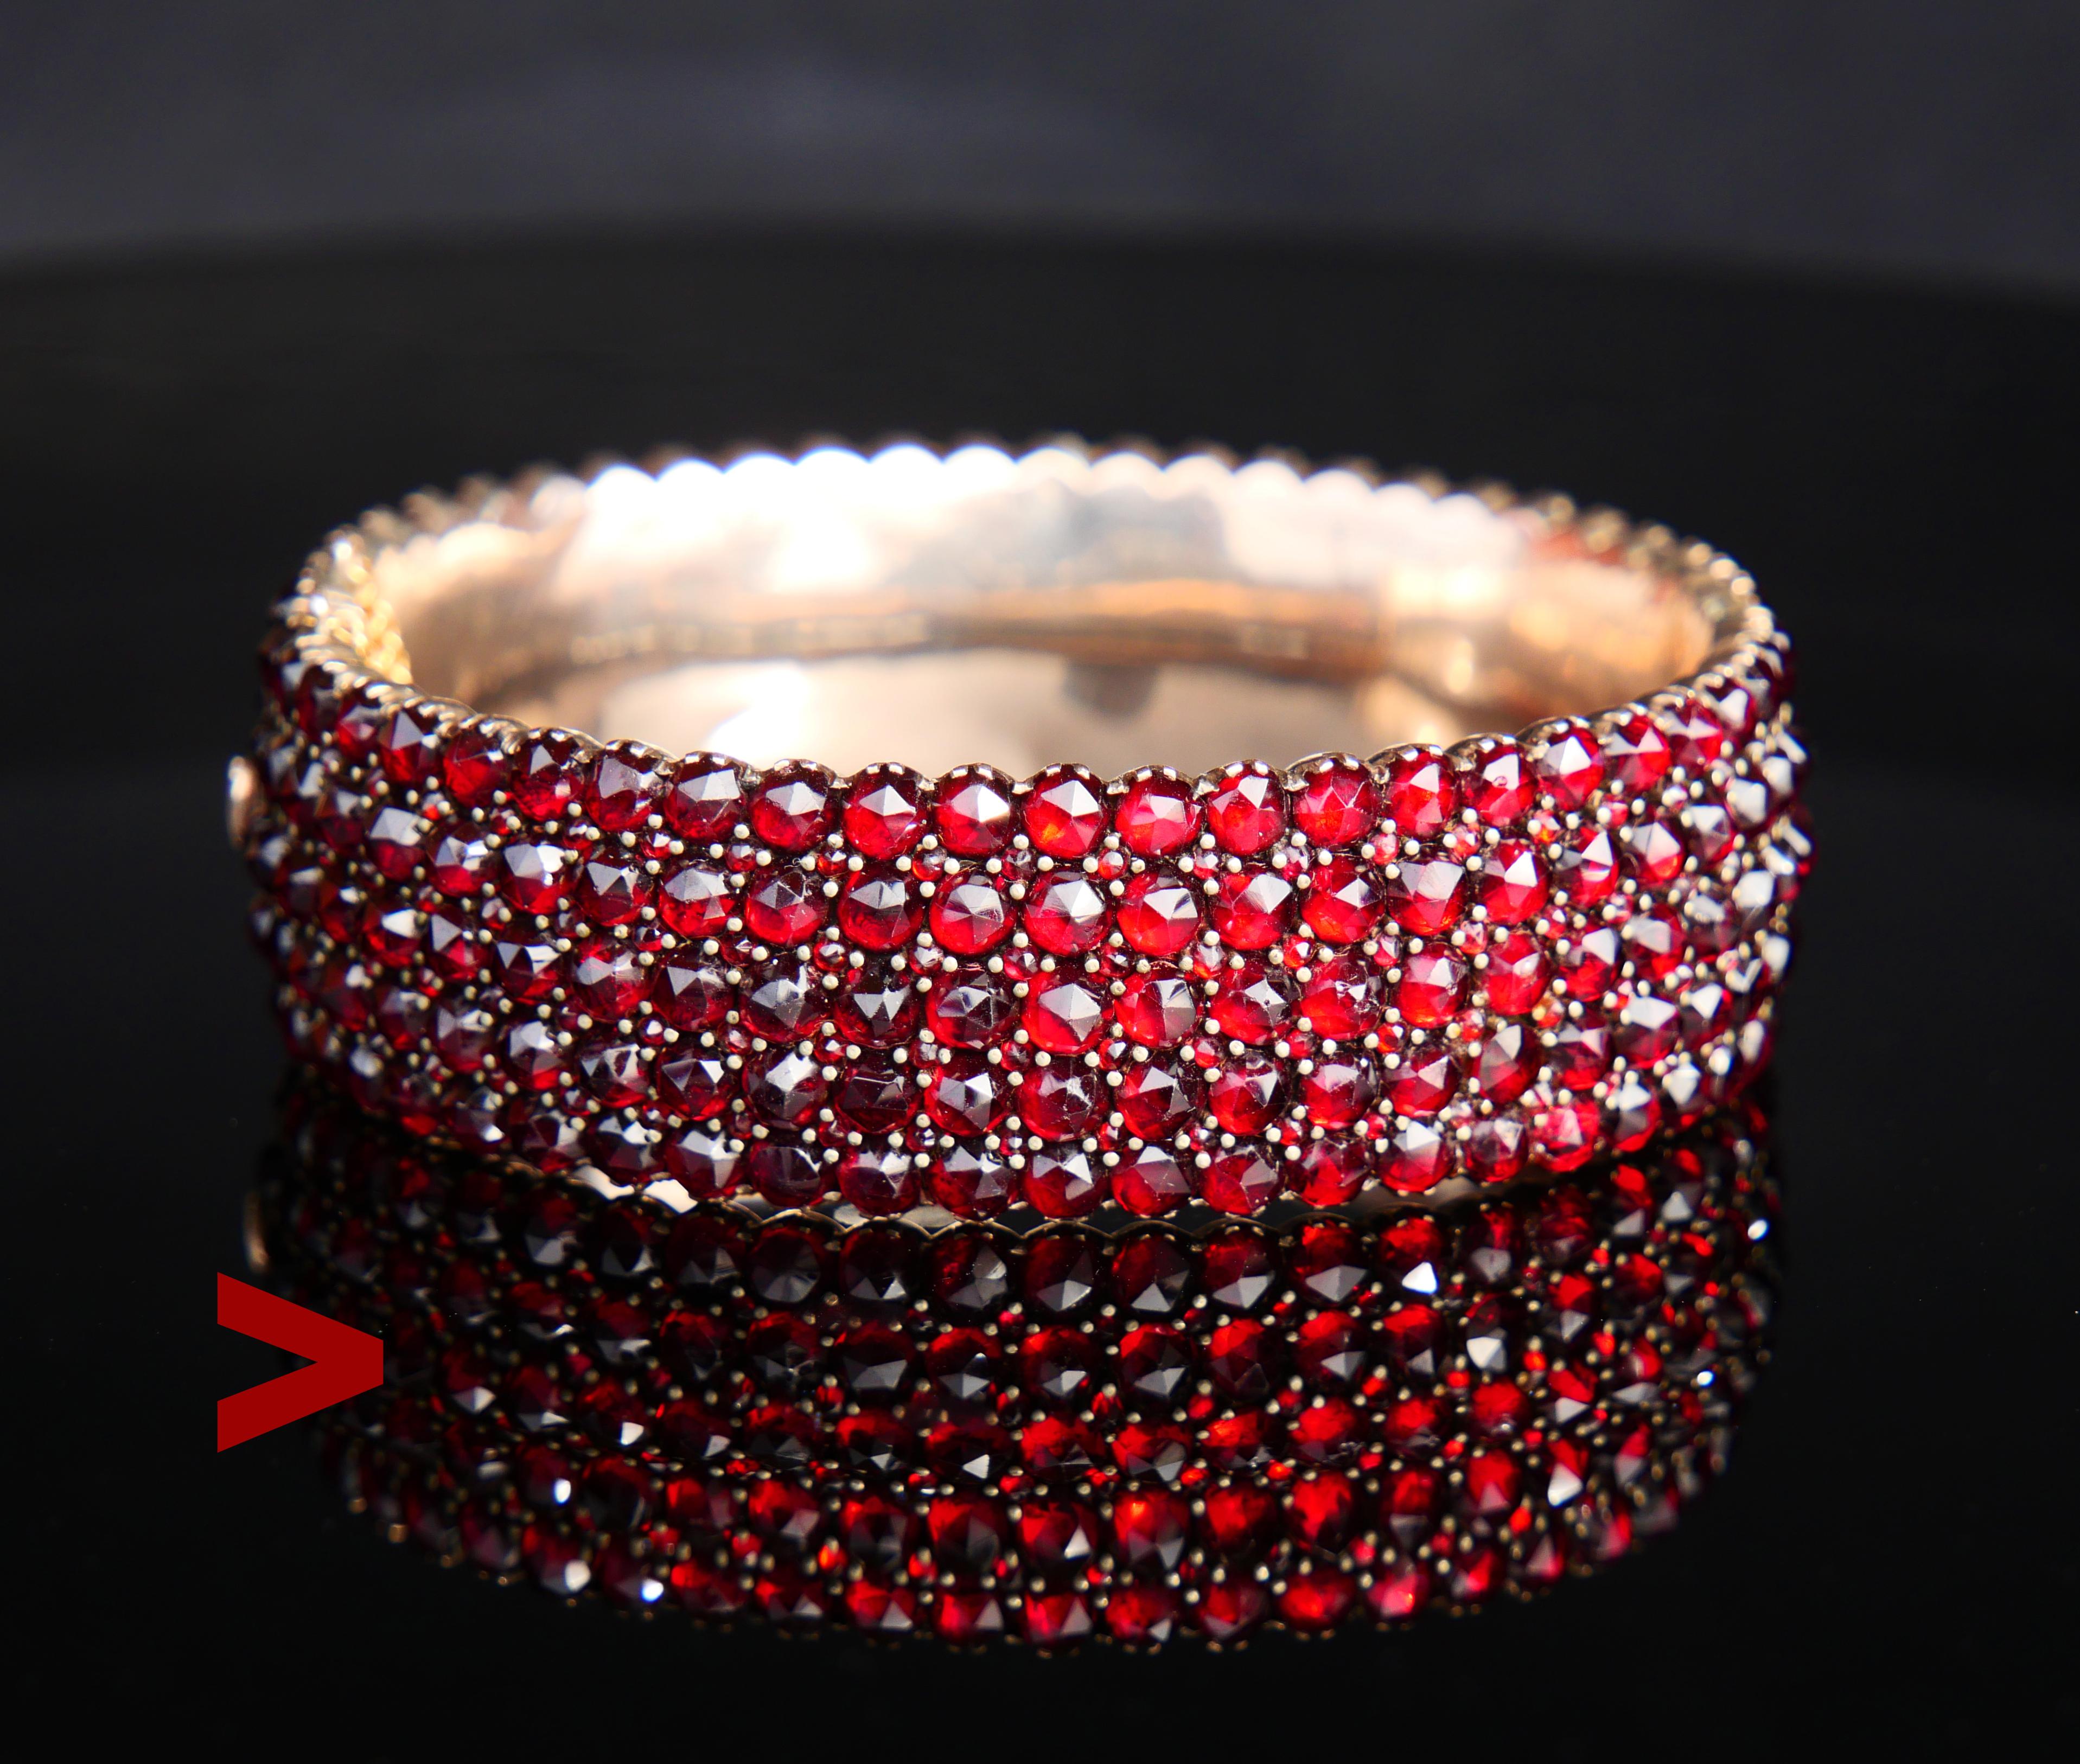 Handmade in Austria / Hungary or Bohemian bracelet, circa 1850 - early 1900s.
A great example of an old Austro-Hungarian jewelry-making School.

Deep rich red Bohemian rose cut Pyrope Garnets are set in Gilt Silver.

There are 120 stones involved,